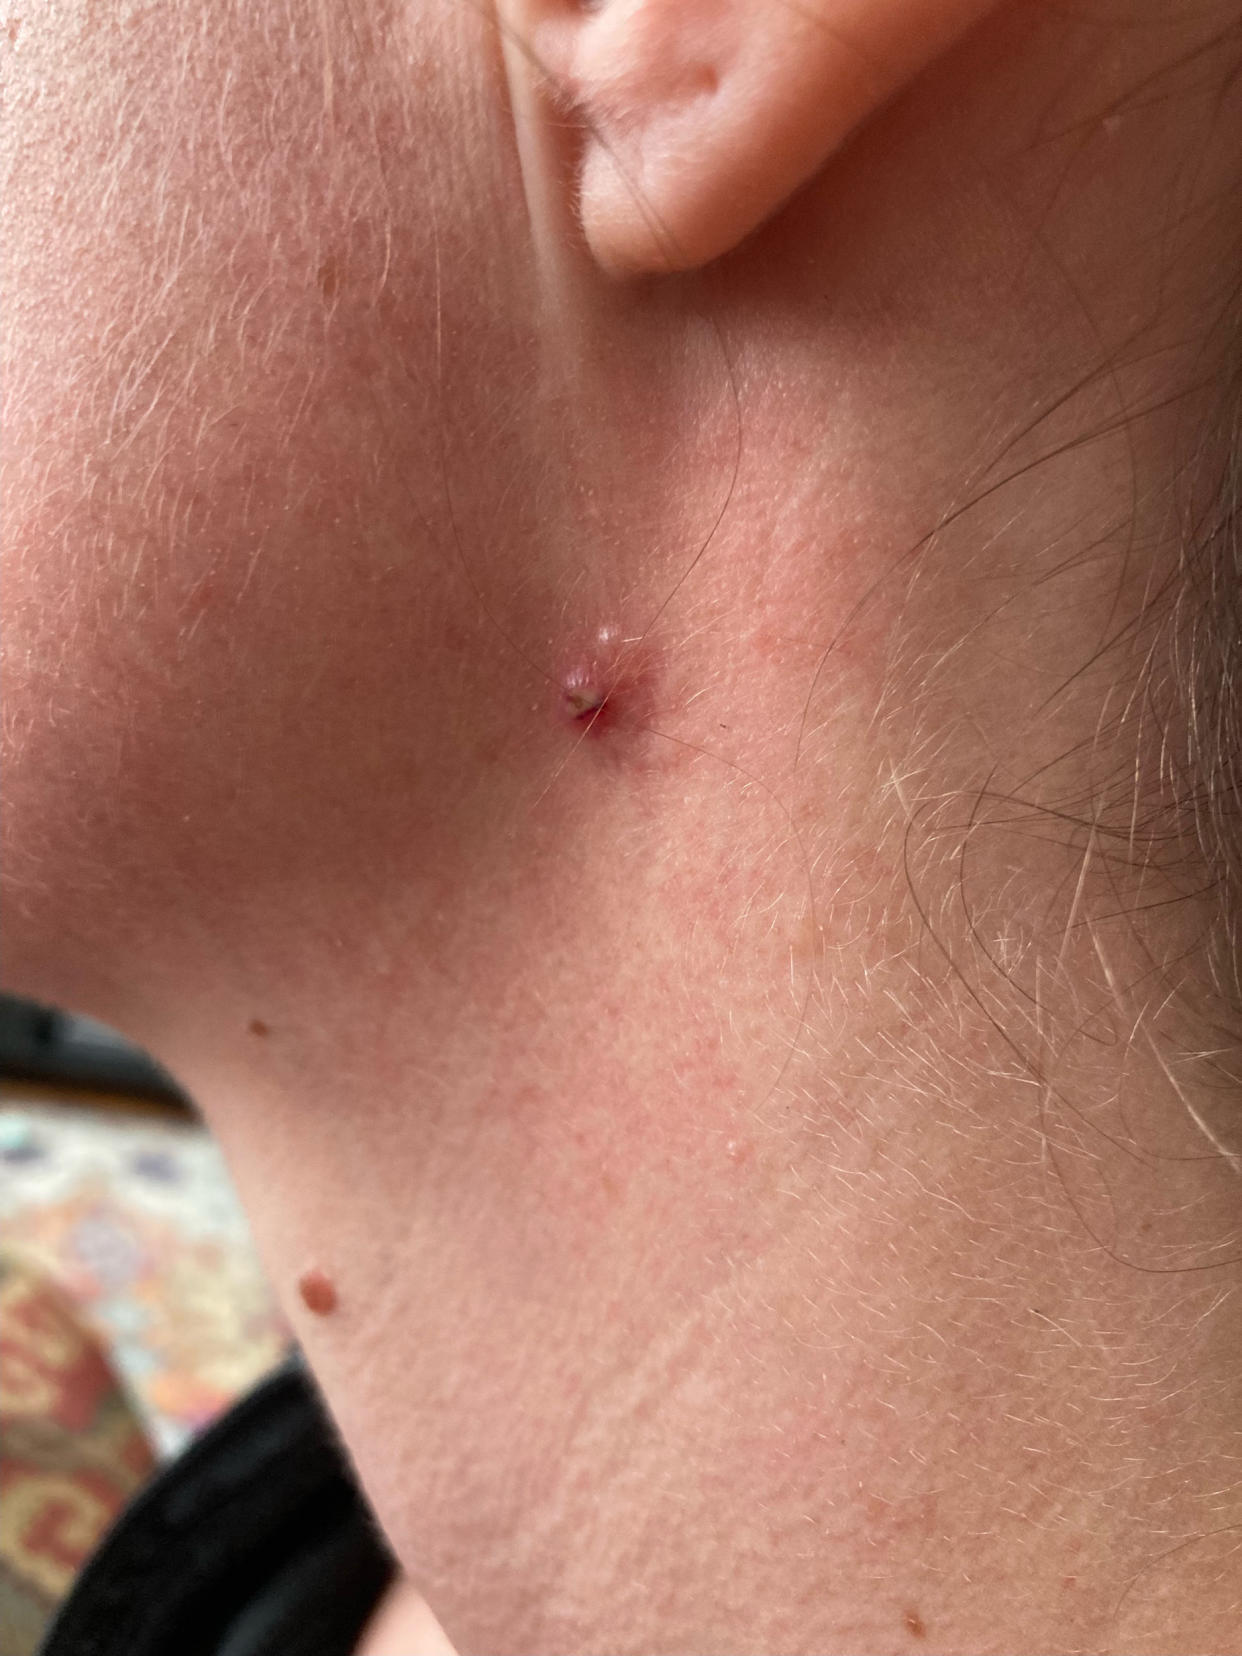 When Megan Fry woke up and saw her mole had changed she knew she needed to see a doctor immediately. (Courtesy Megan Fry)